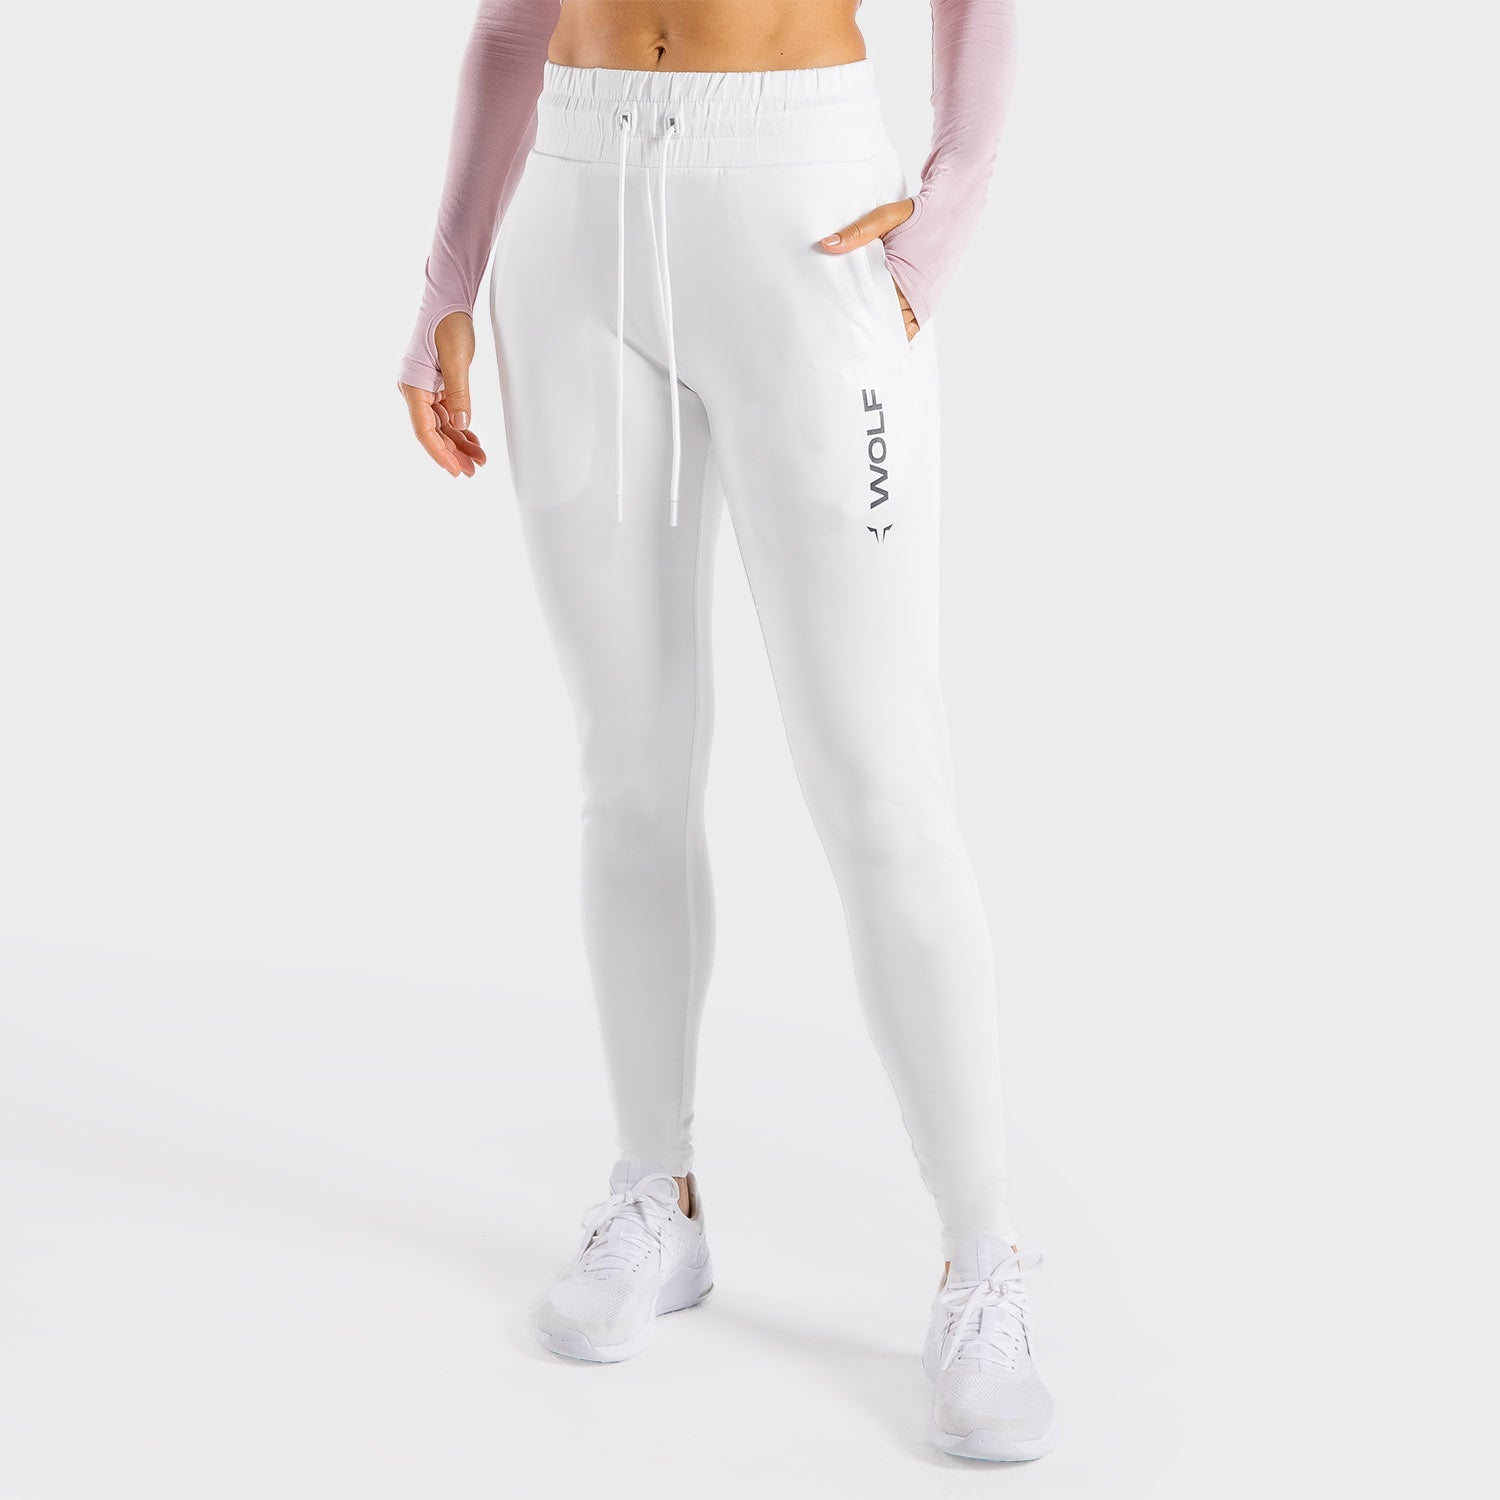 squatwolf-gym-pants-for-women-primal-joggers-pearl-white-workout-clothes